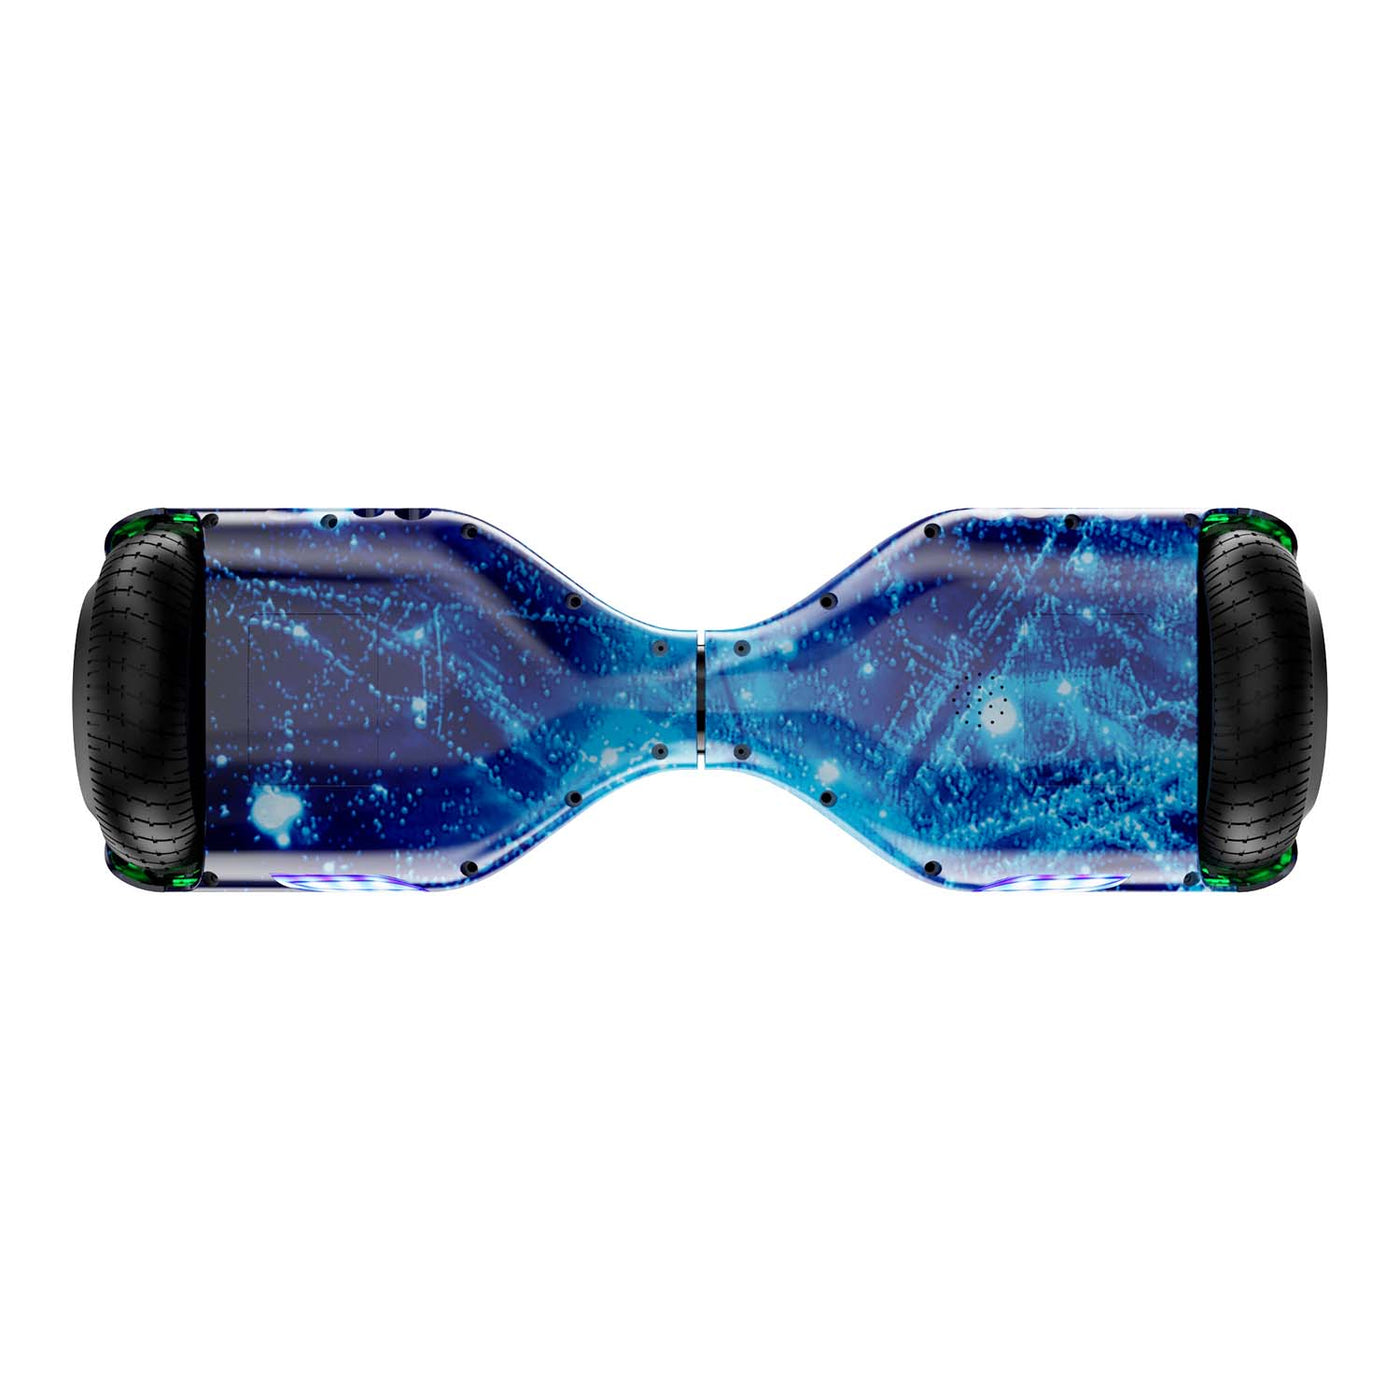 iHoverboard H4 Bluetooth-Hoverboard 6.5"